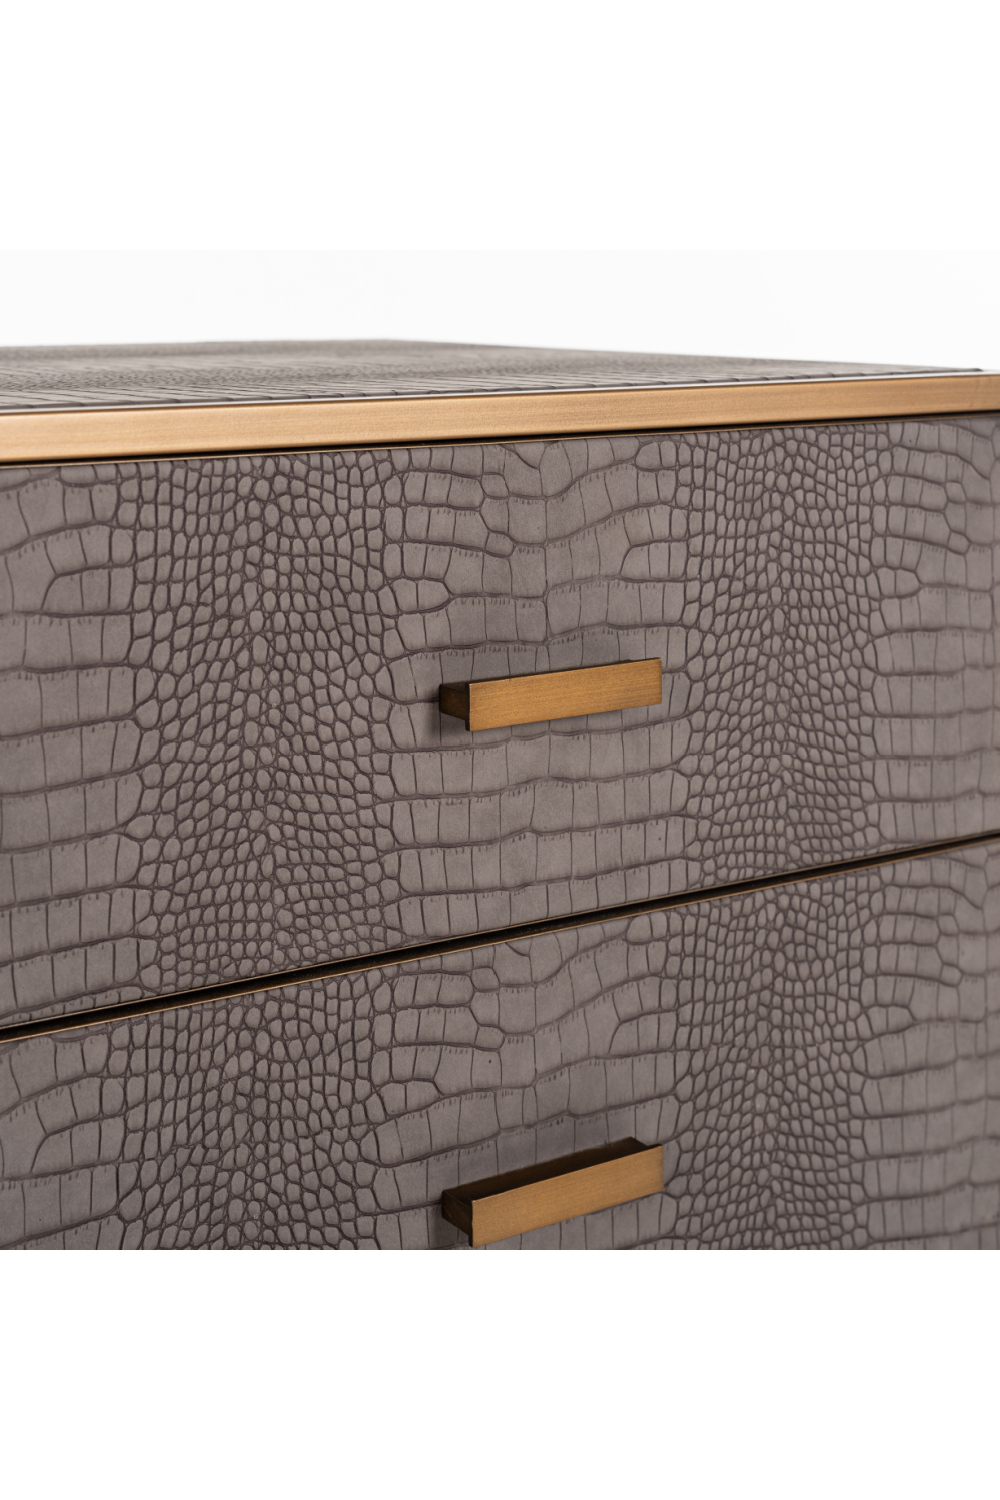 Brown Leather Chest of Drawers | OROA Classio | OROA.com